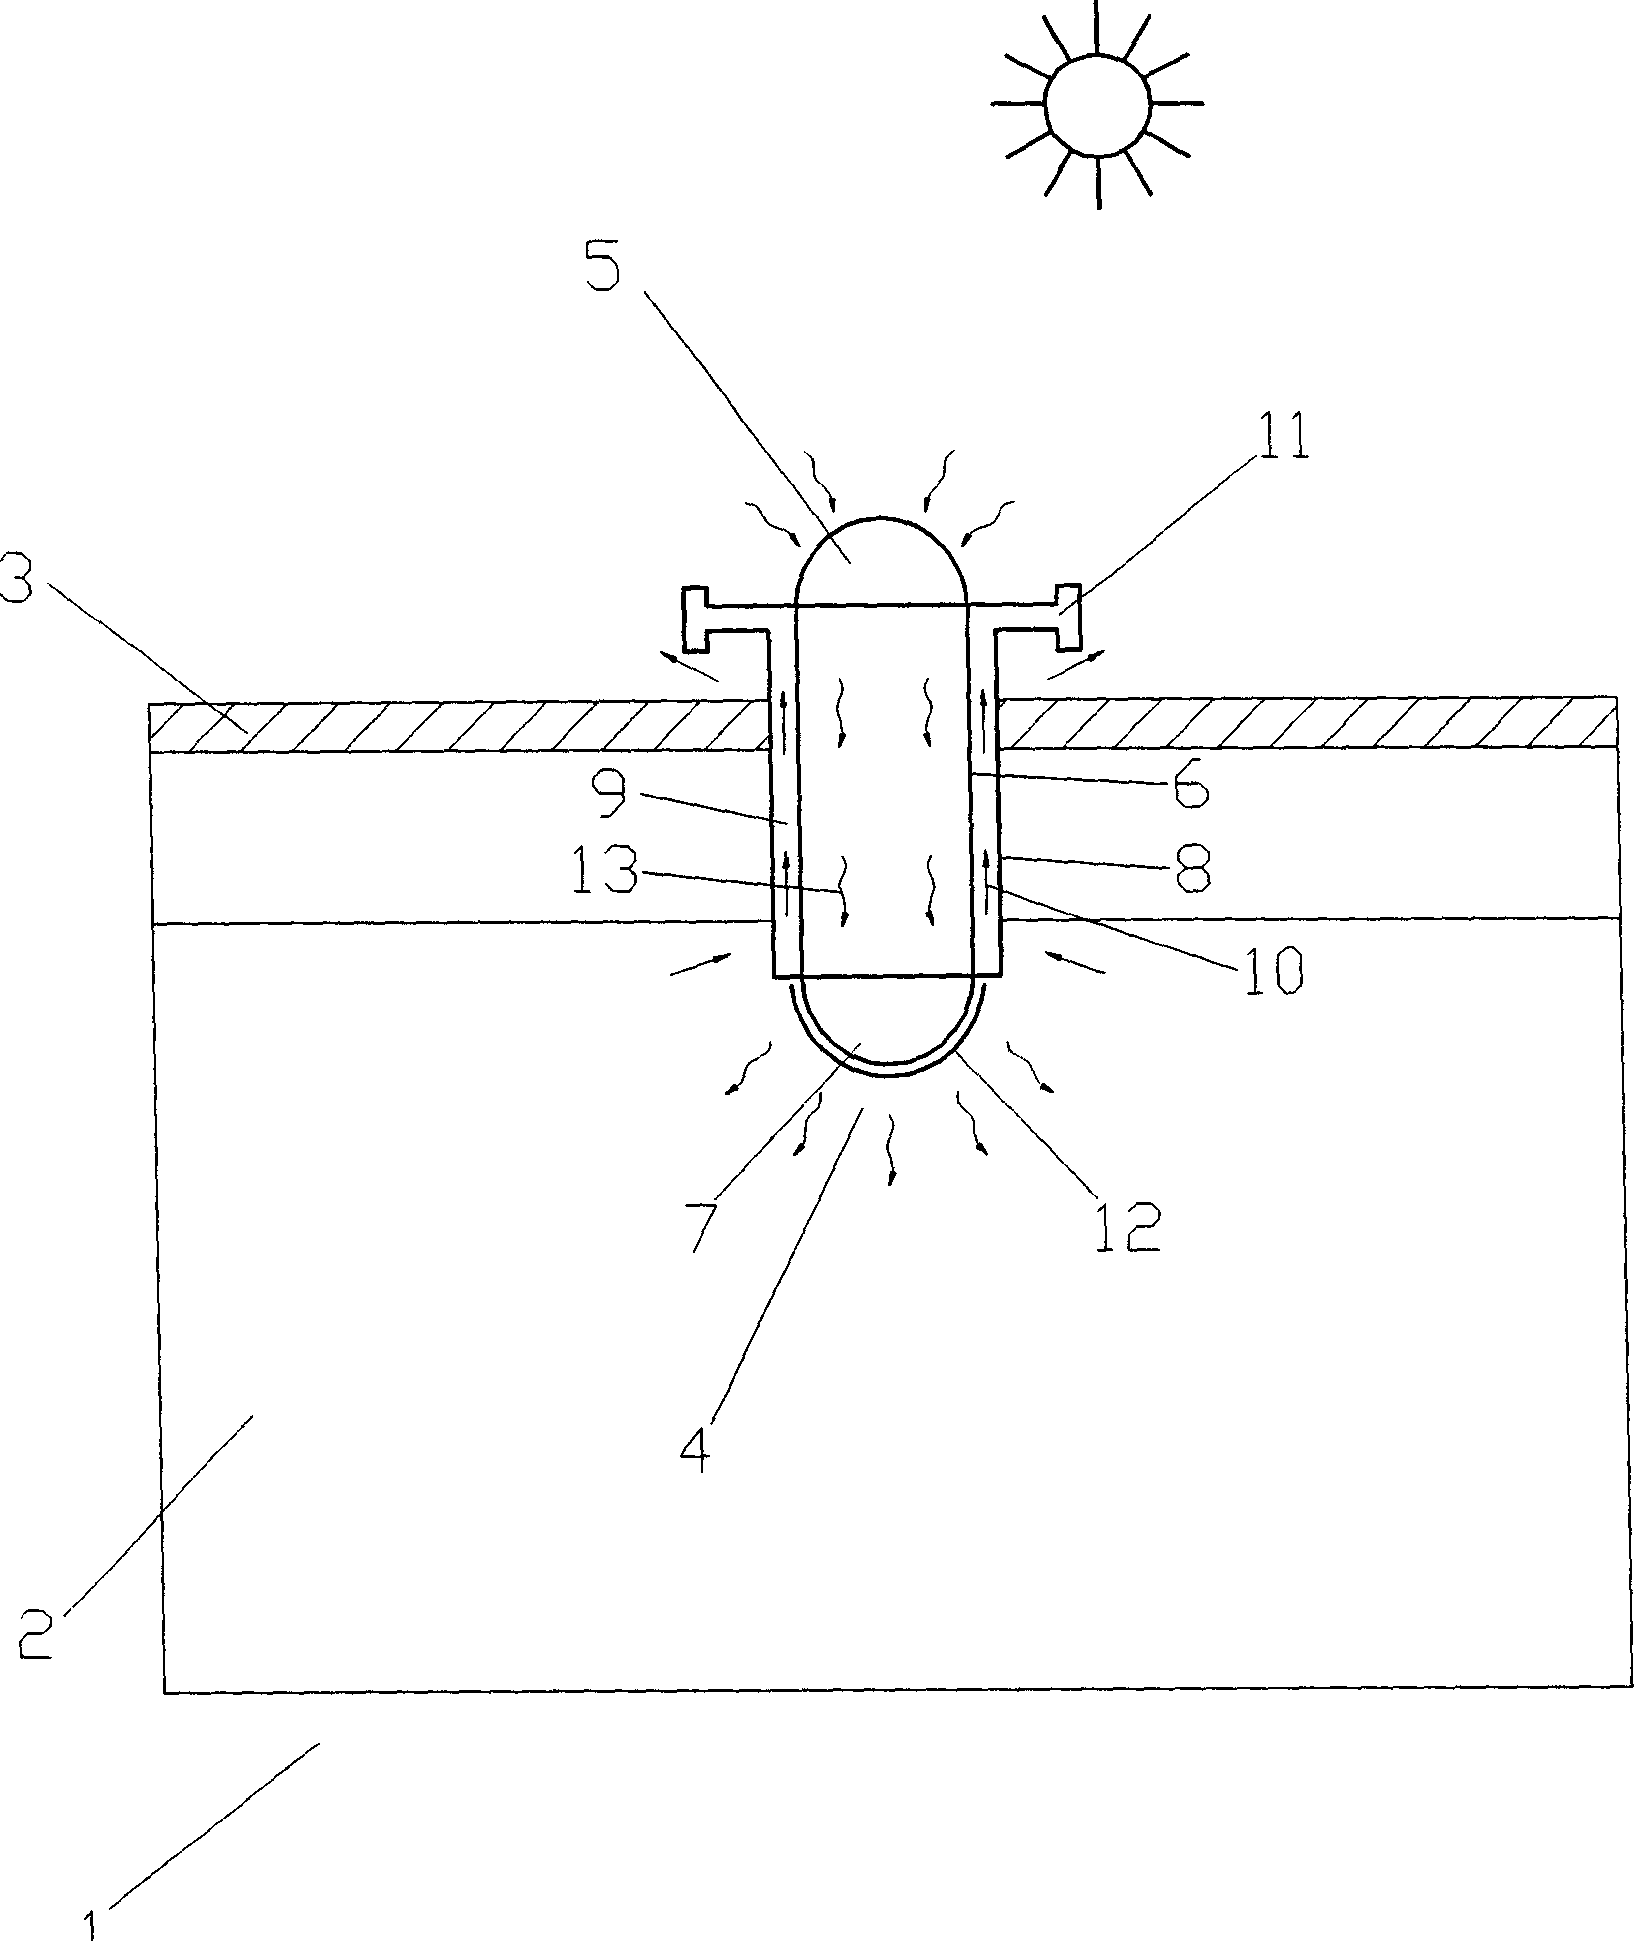 Light conduit system for realizing light catalytic air purification and natural ventilation